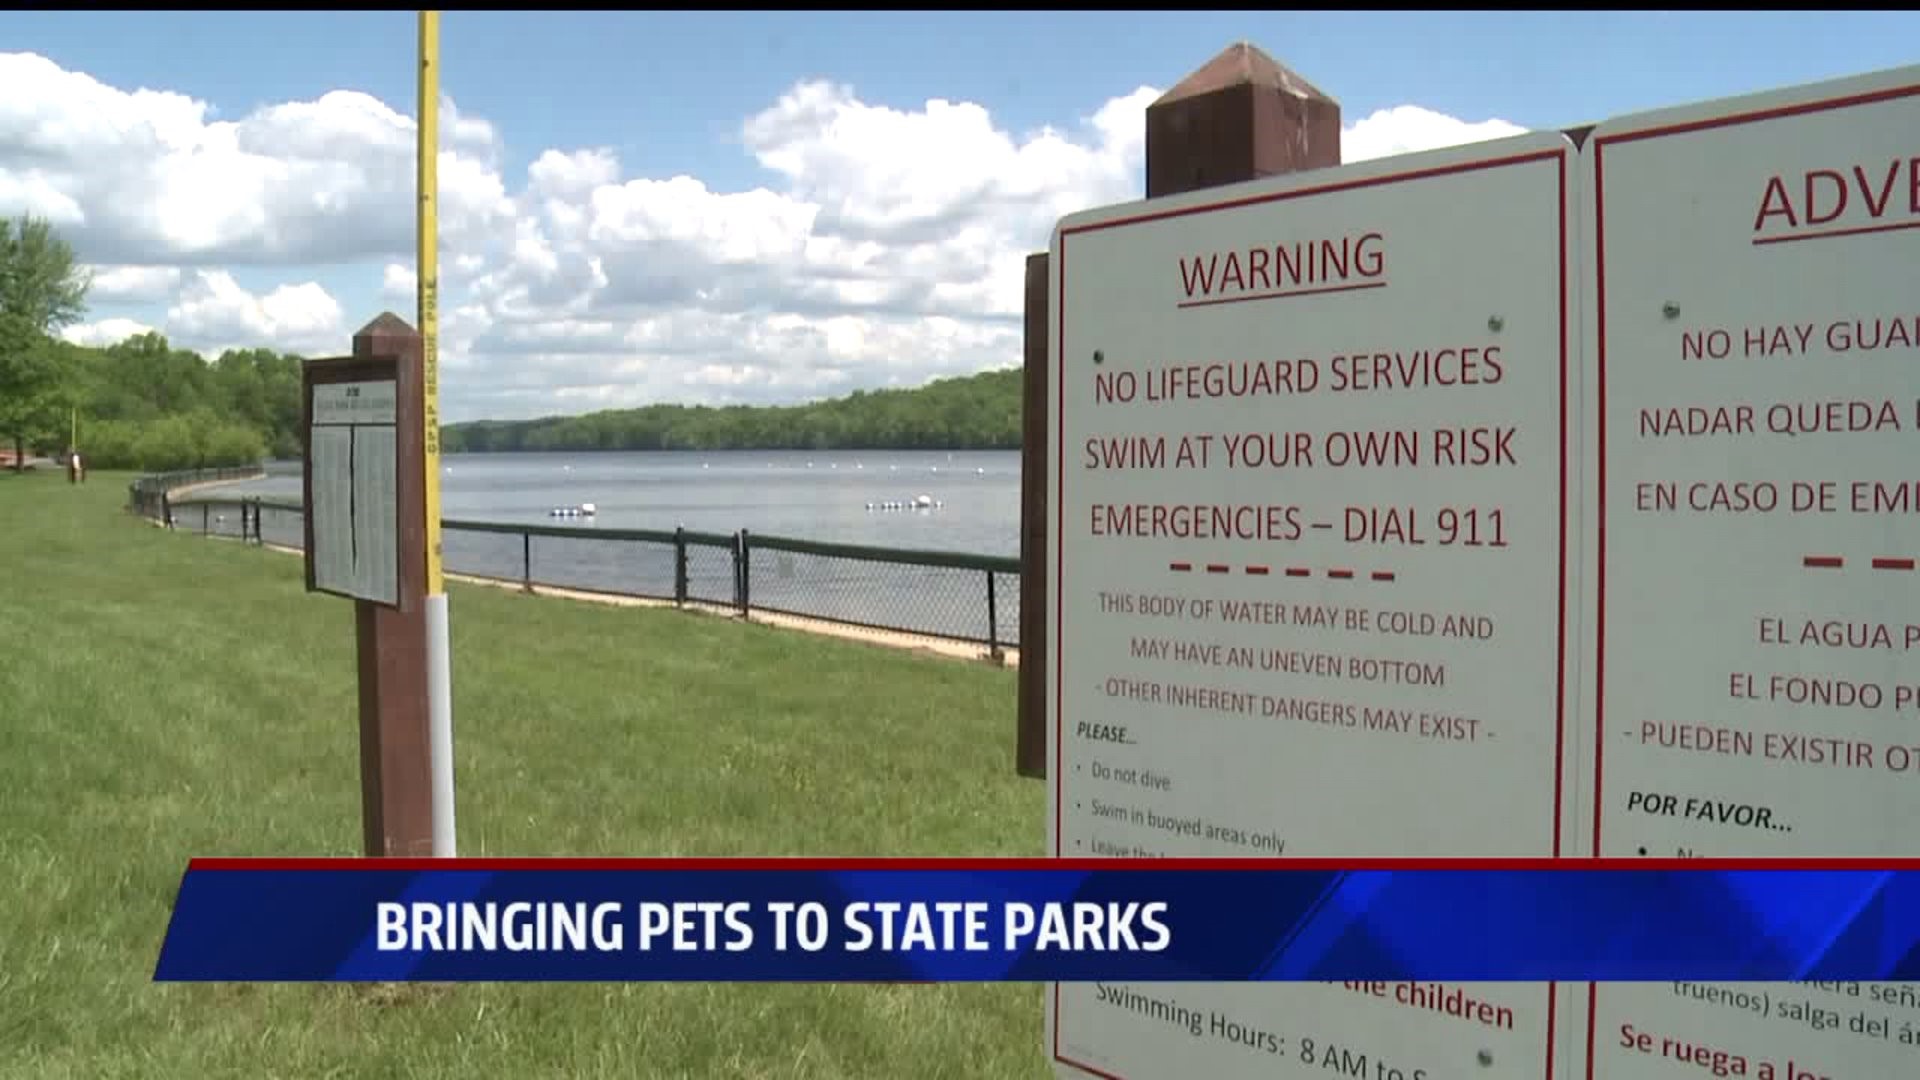 Governor Tom Wolf announced pets will be permitted in more state parks